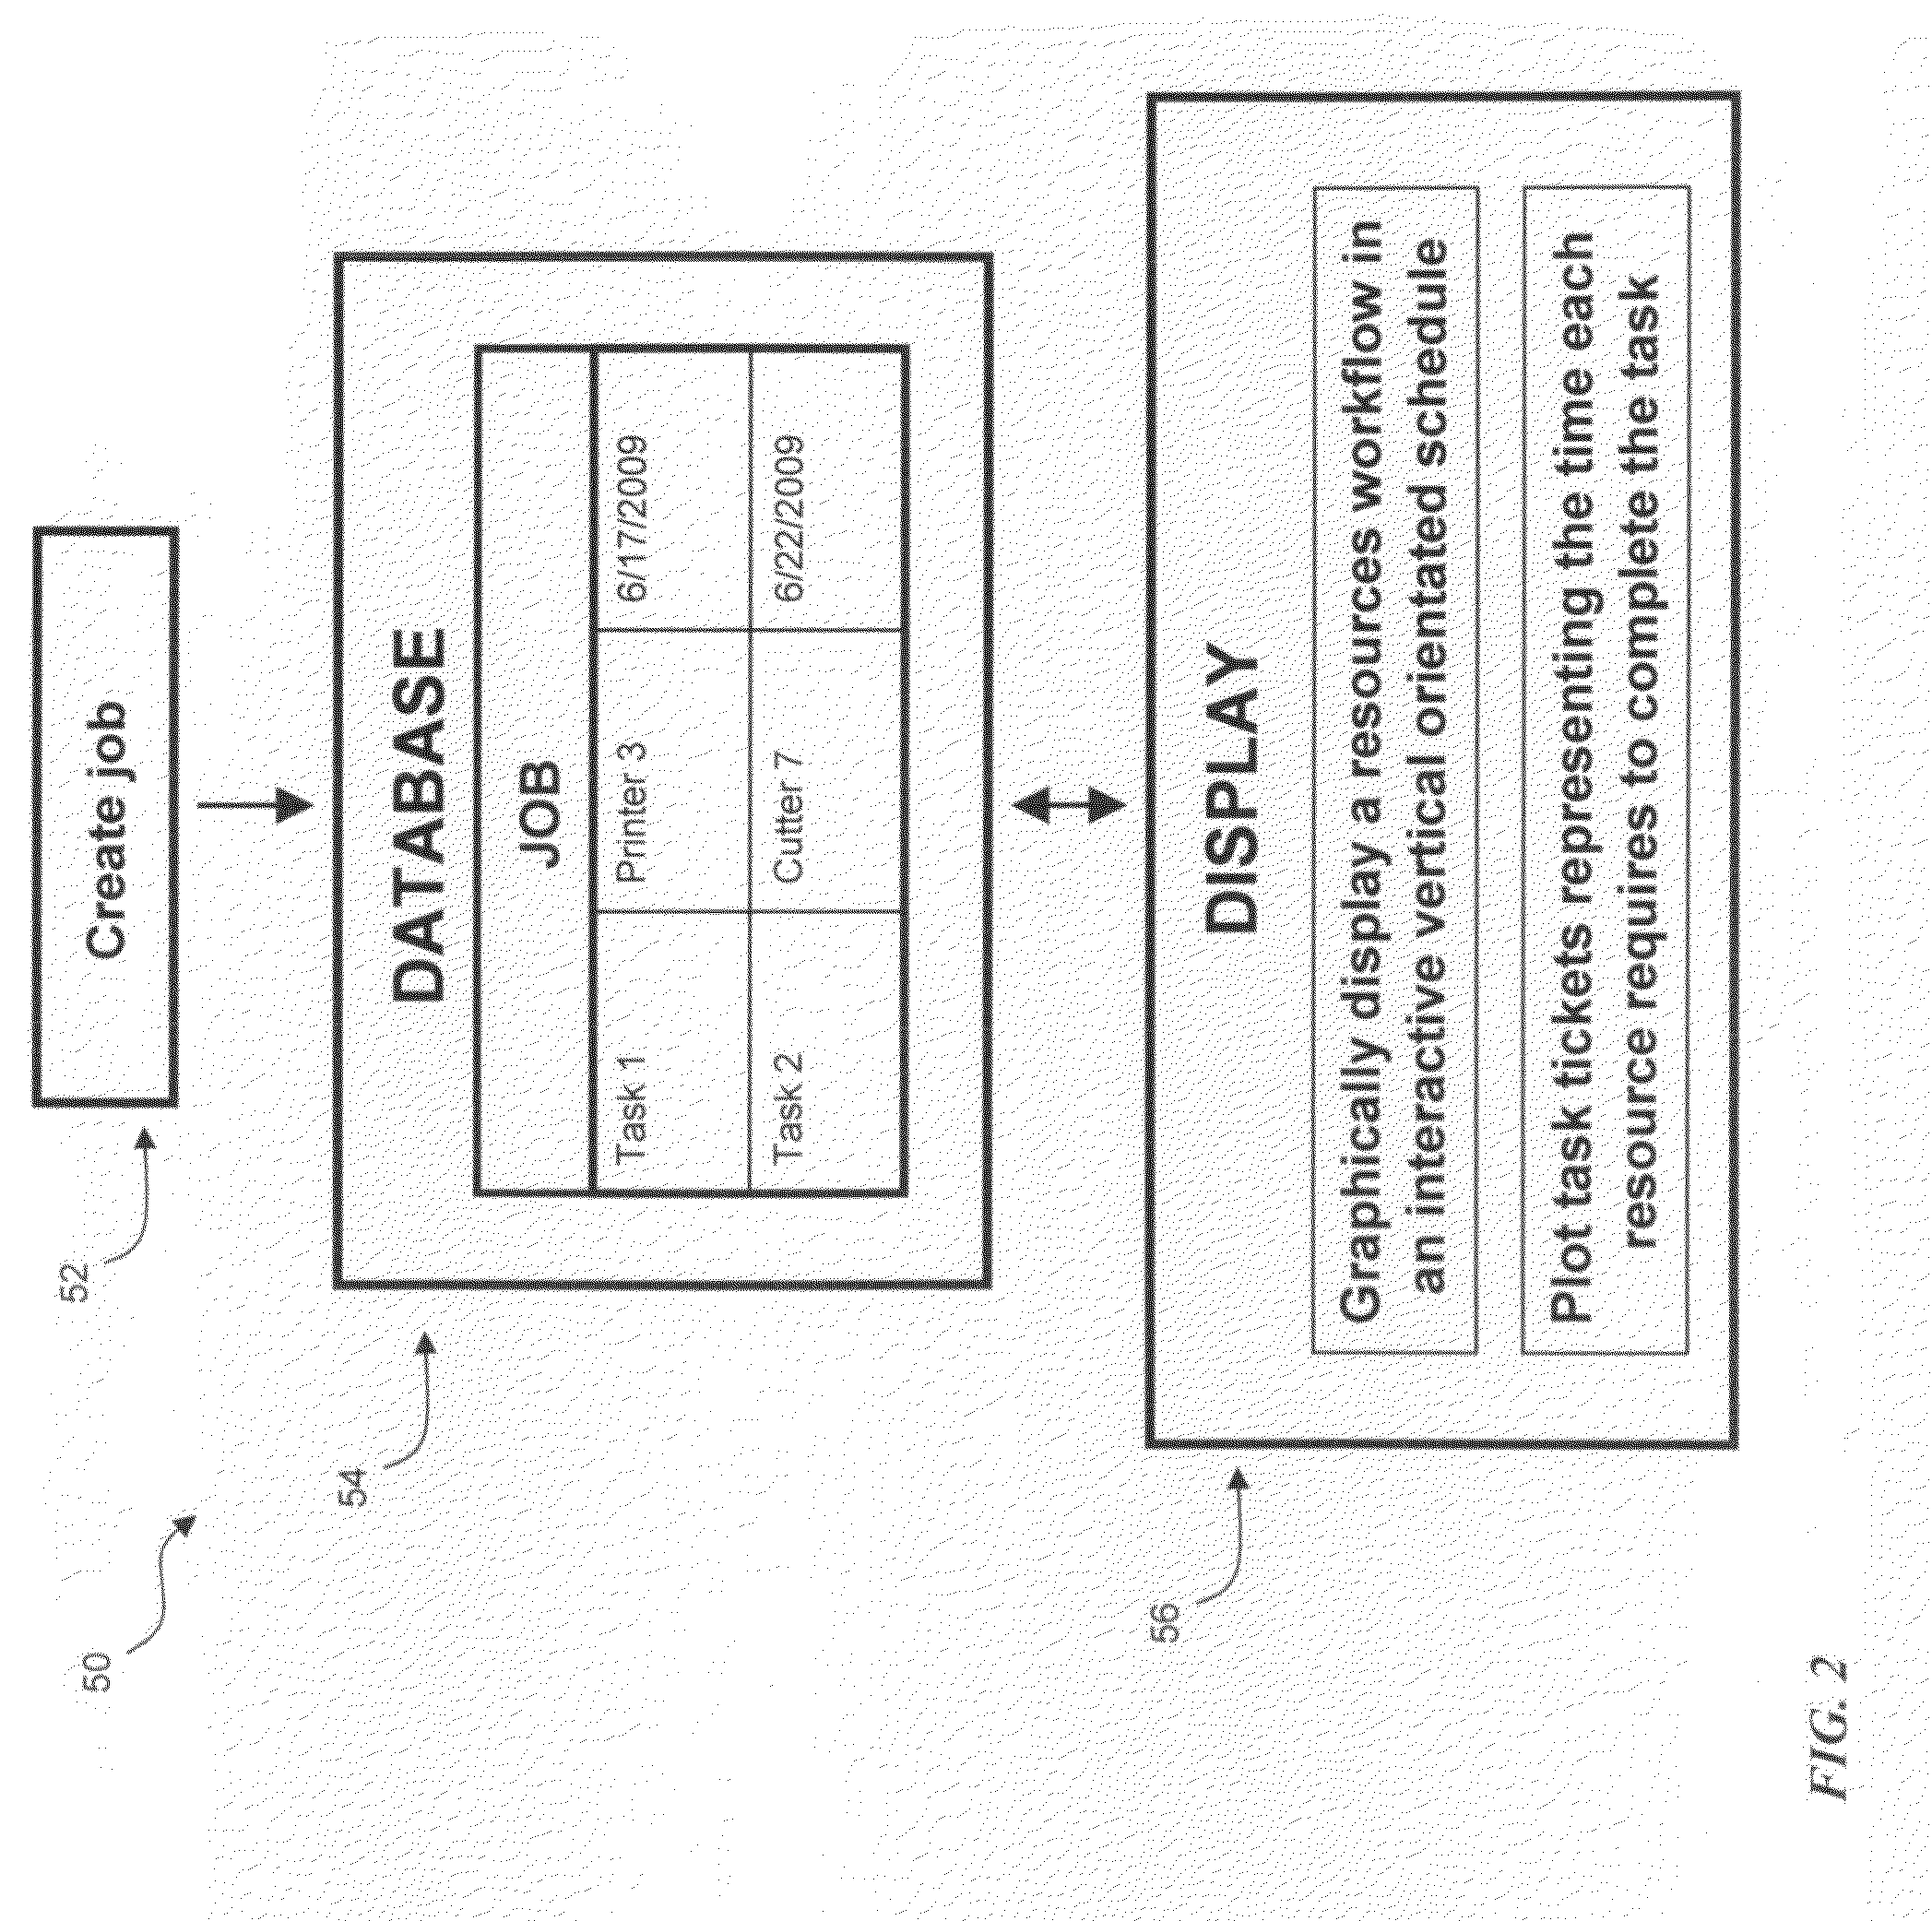 System and Method for Resource Workflow Scheduling